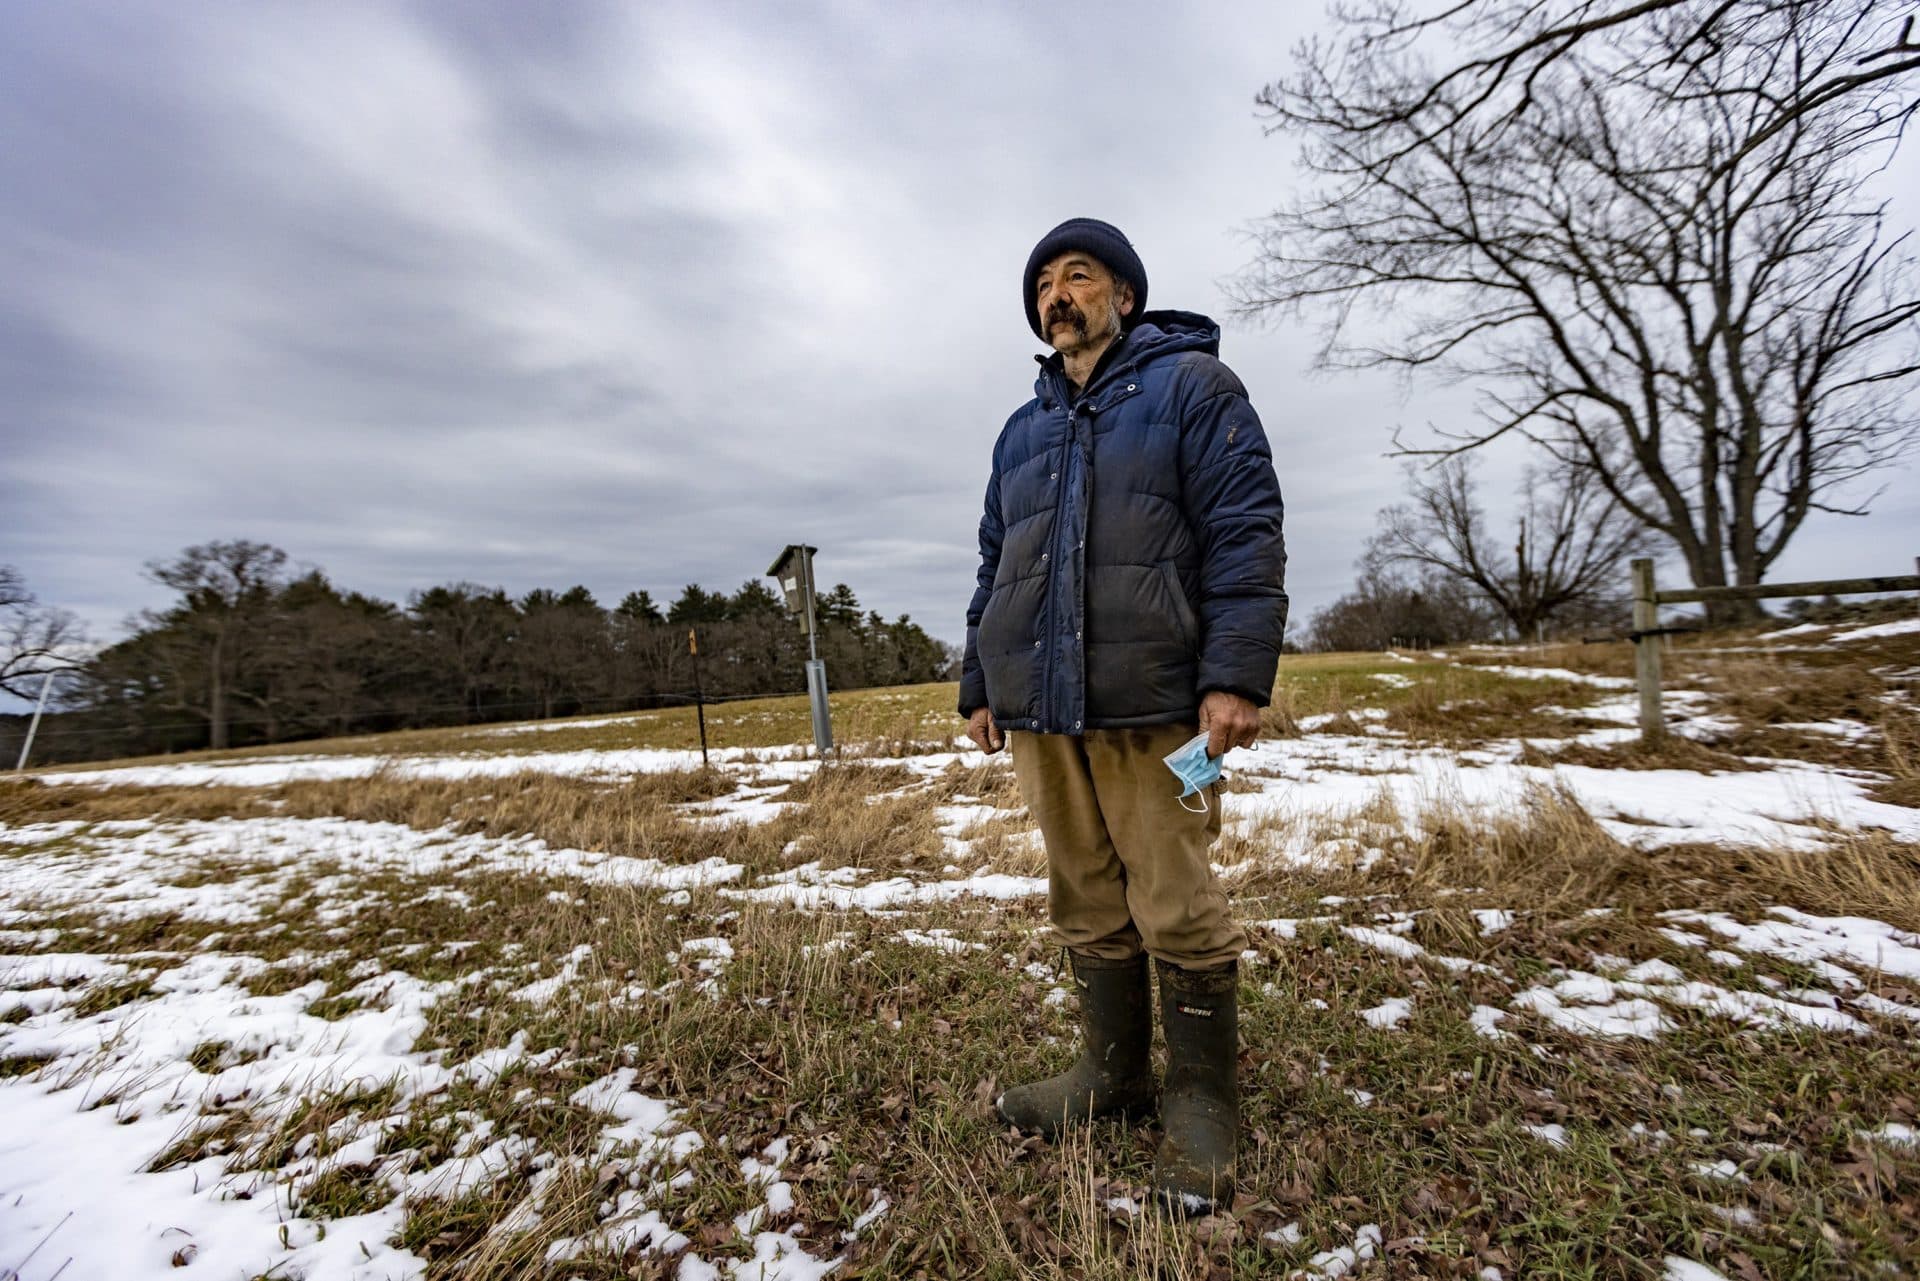 Aaron Knight looks out into the empty grazing fields at Appleton Farms in Ipswich. (Jesse Costa/WBUR)